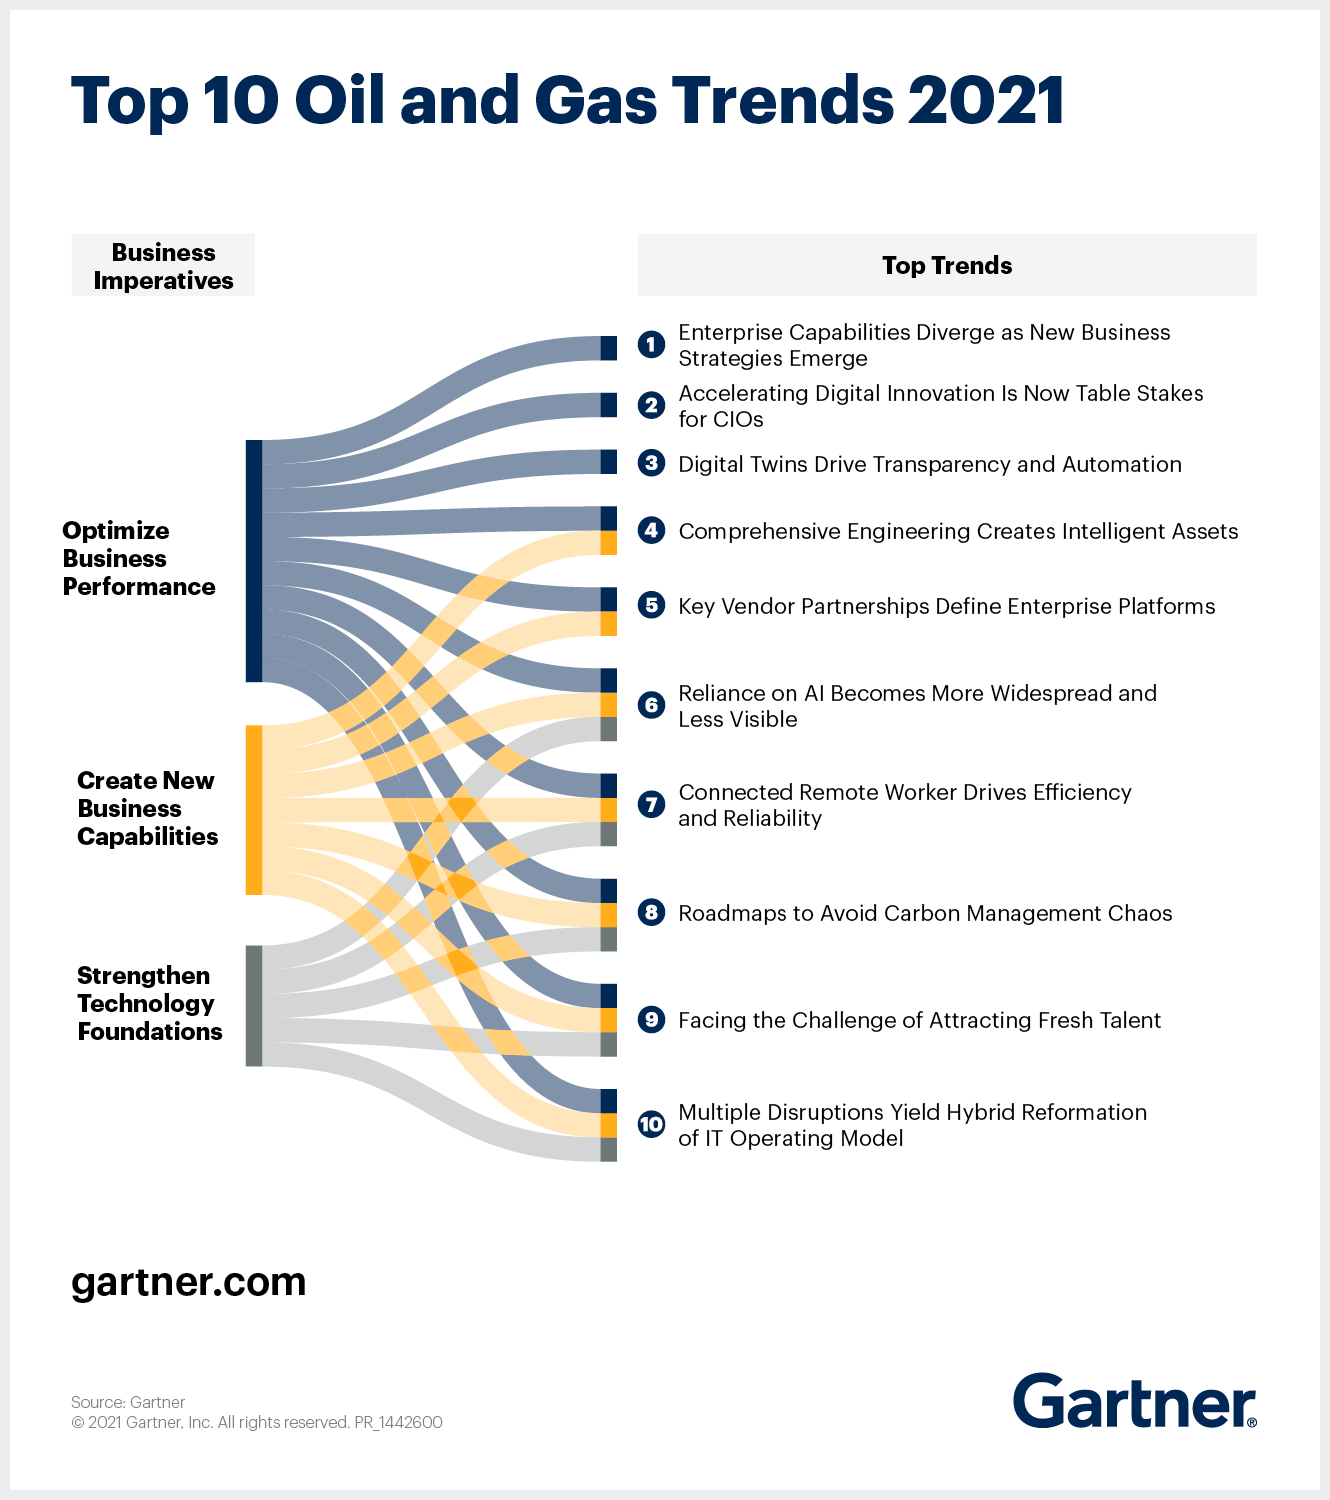 The image is a list of top 10 oil and gas trends that will impact the CIOs in this sector in 2021